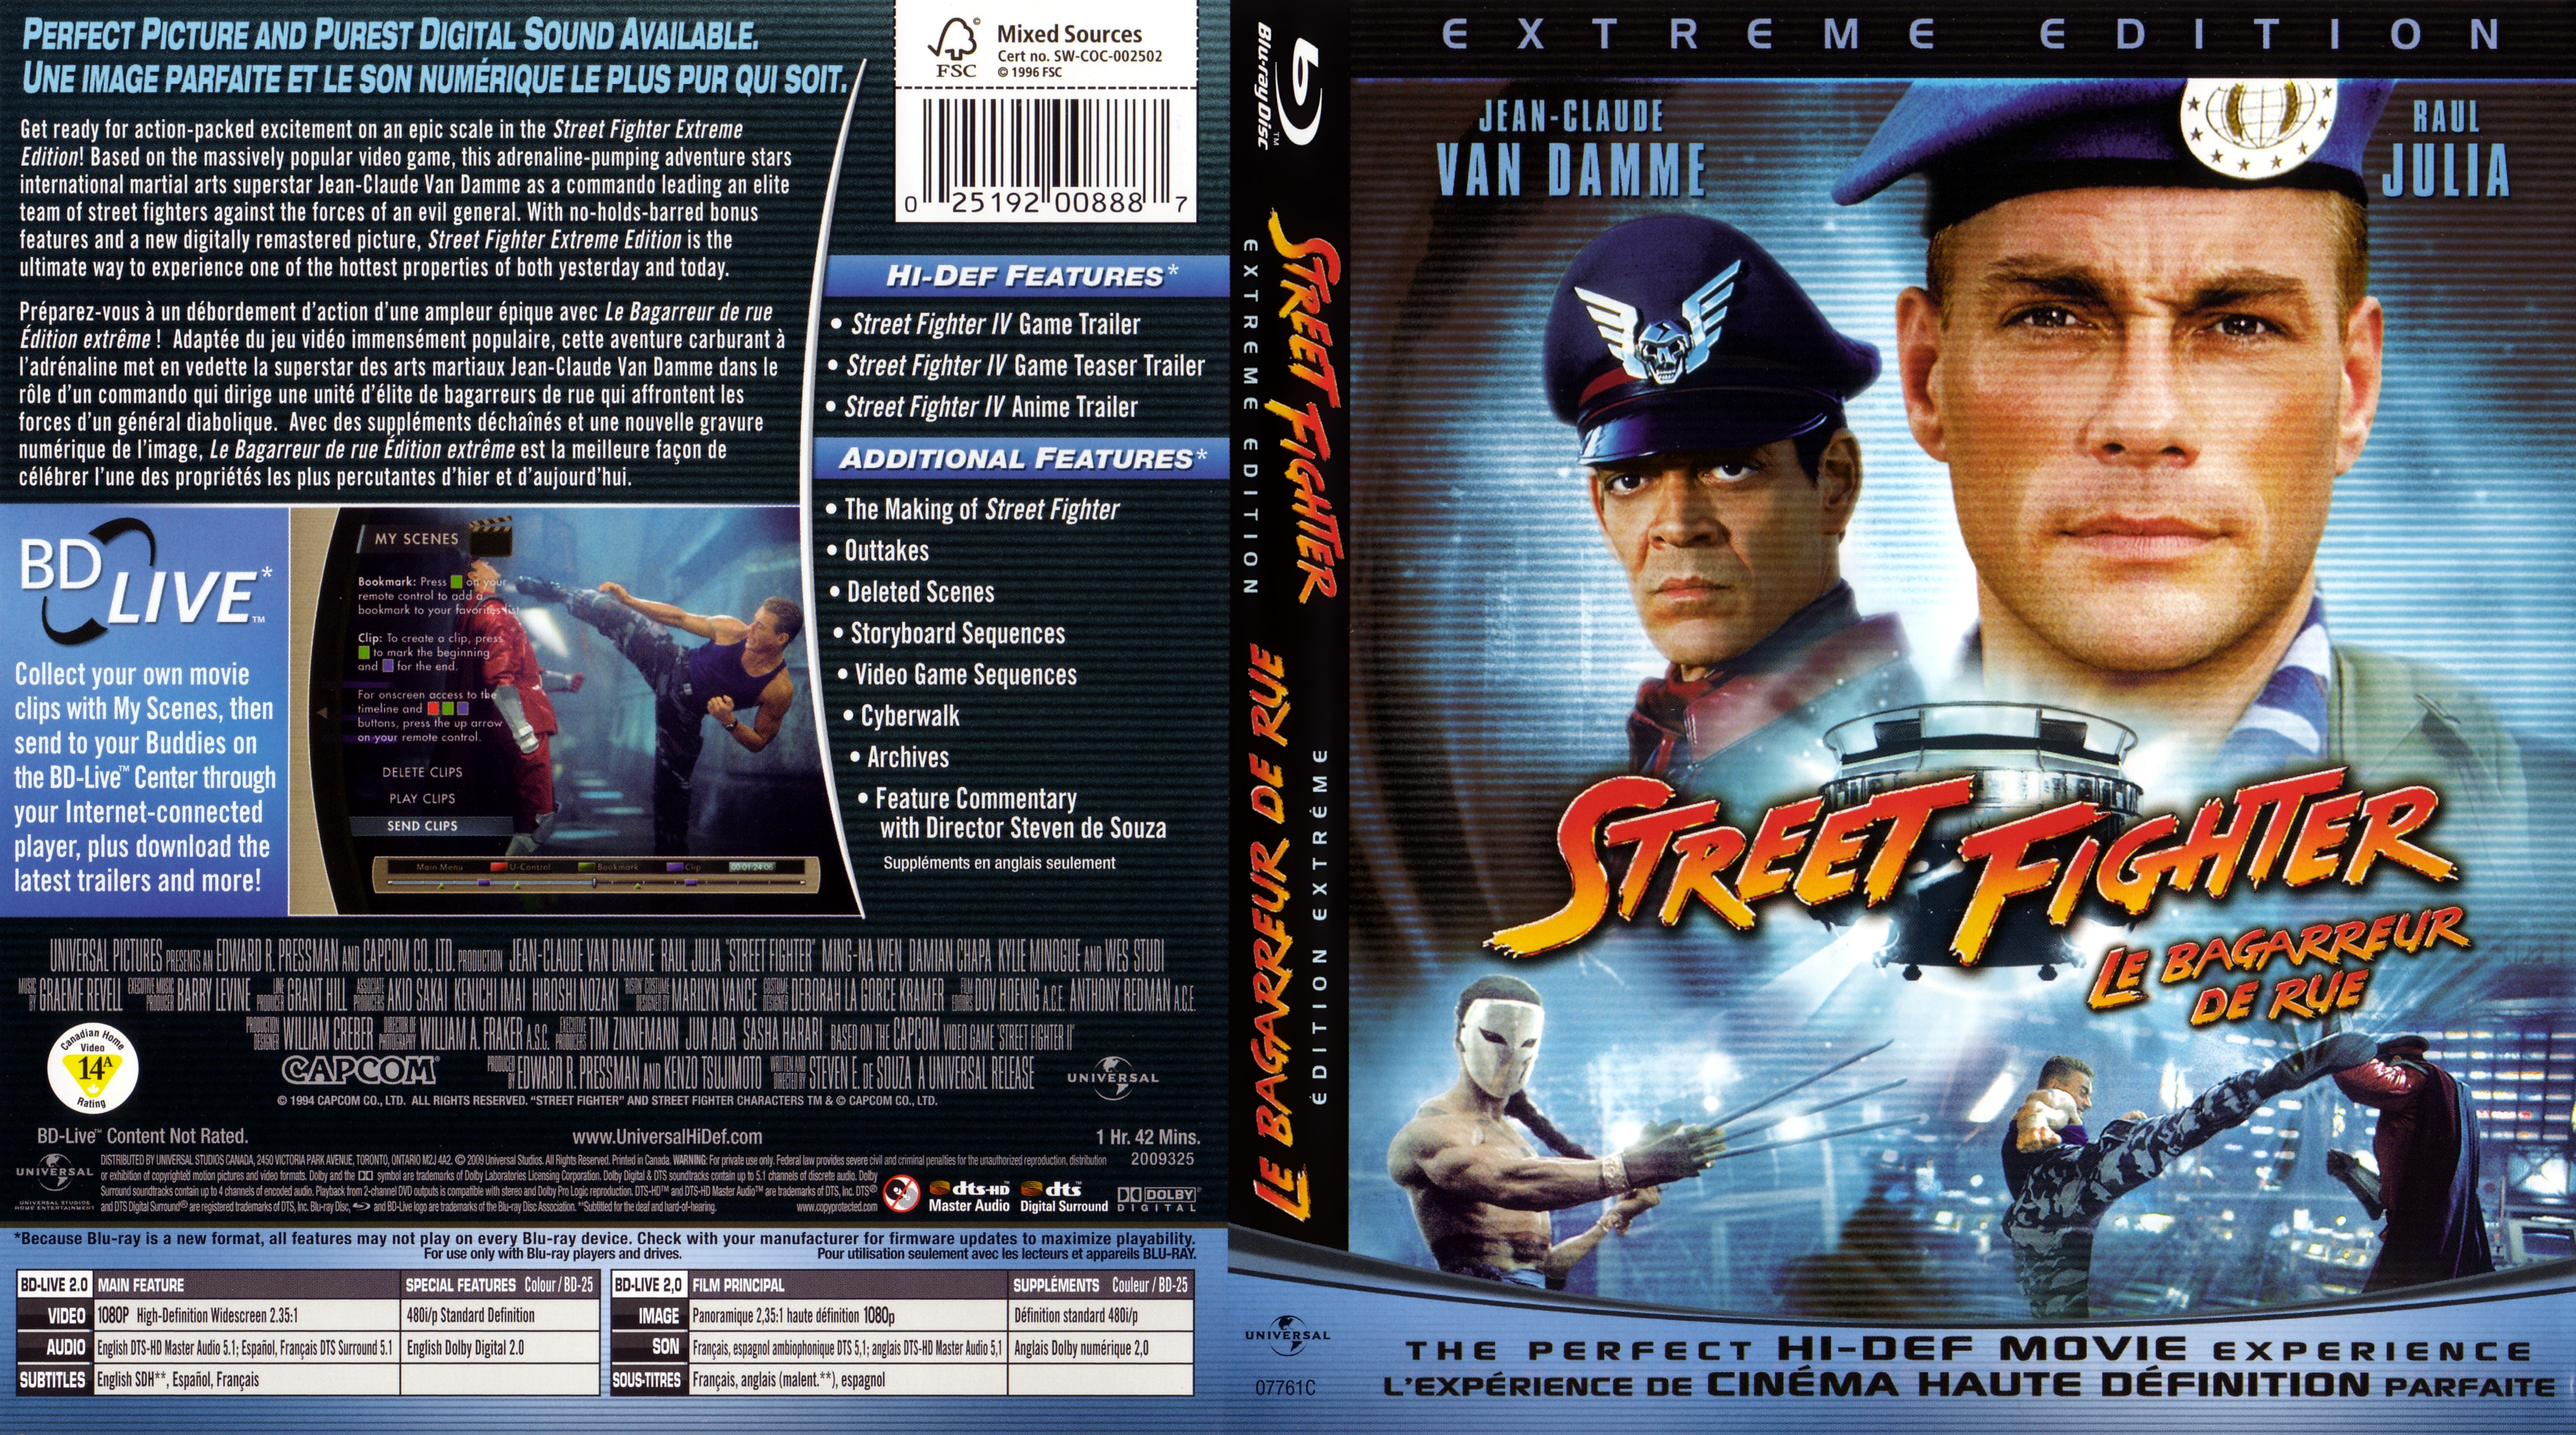 Jaquette DVD Street fighter (Canadienne) (BLU-RAY)